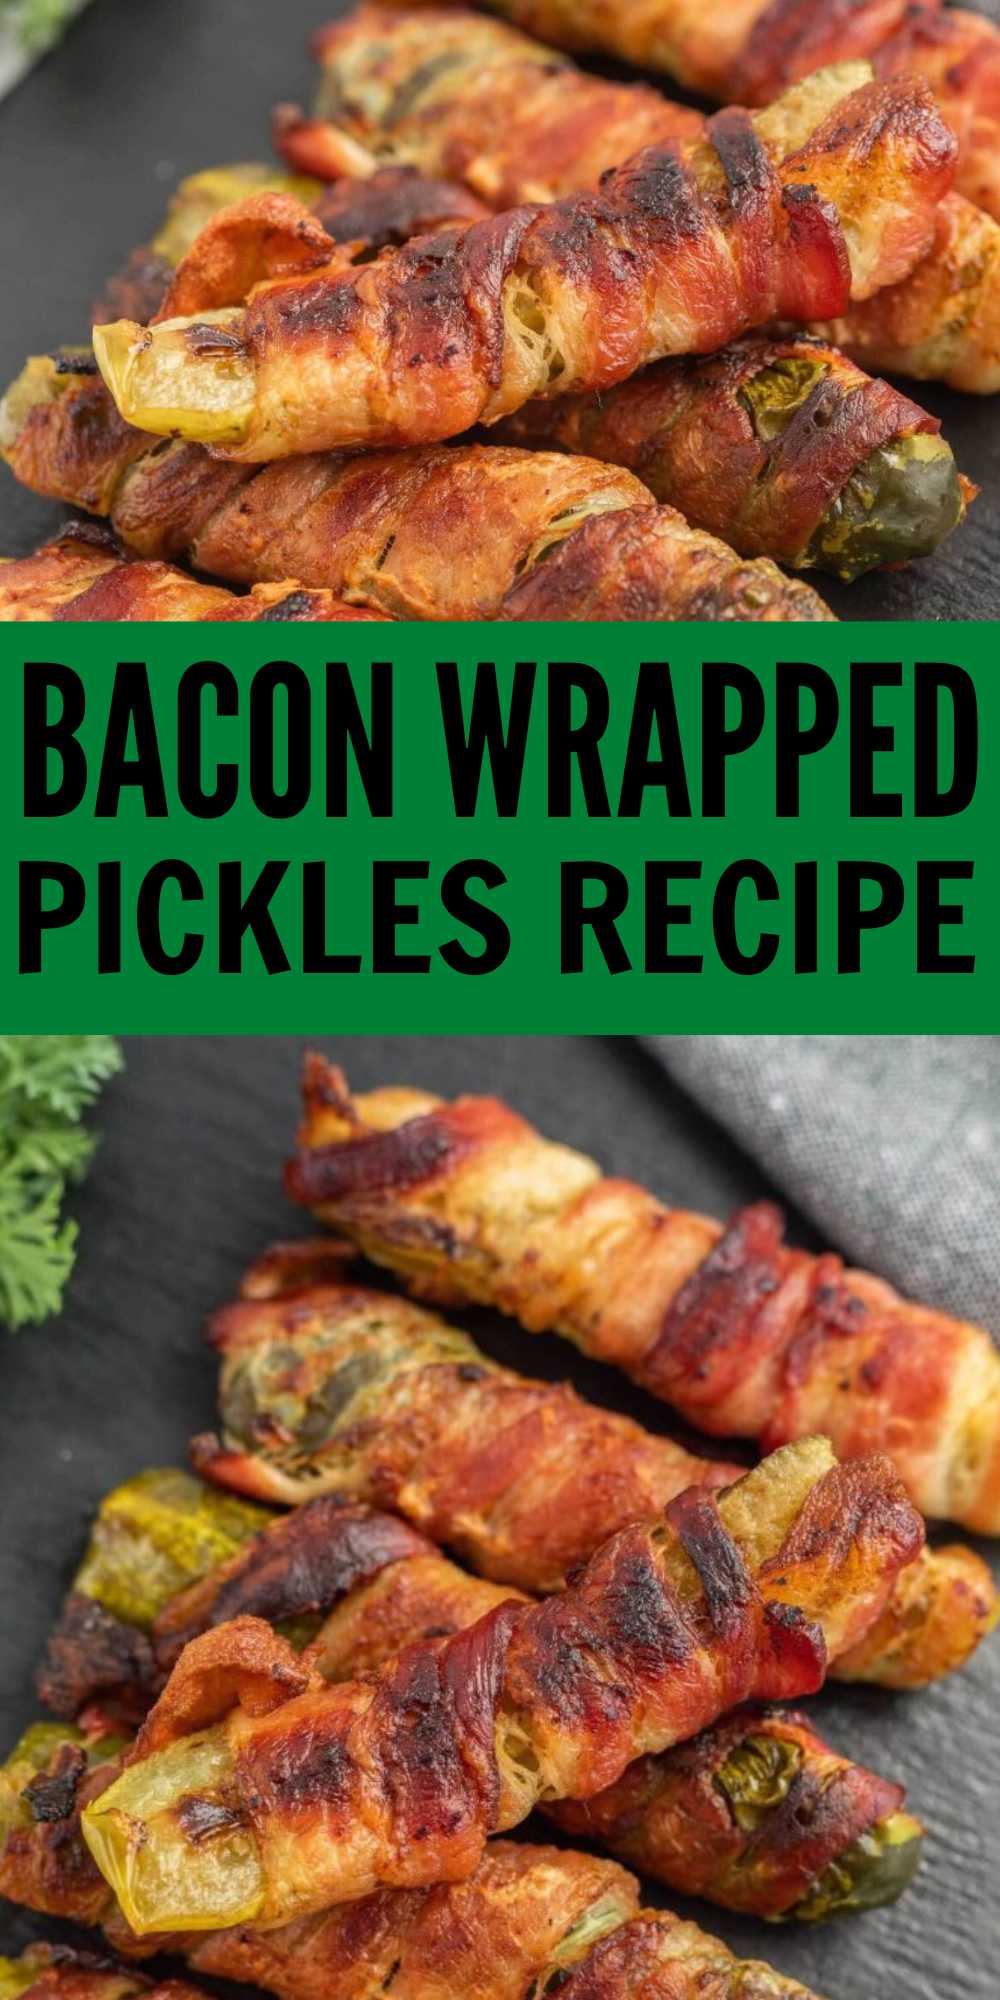 Bacon Wrapped Pickles come together with only 3 ingredients. Each bite is crispy perfection and even better dipped in ranch. Pickle Fries have to be the easiest recipe ever. Dill pickle spears are wrapped in smoky bacon and baked until crispy. #eatingonadime #baconwrappedpickles #easysnack